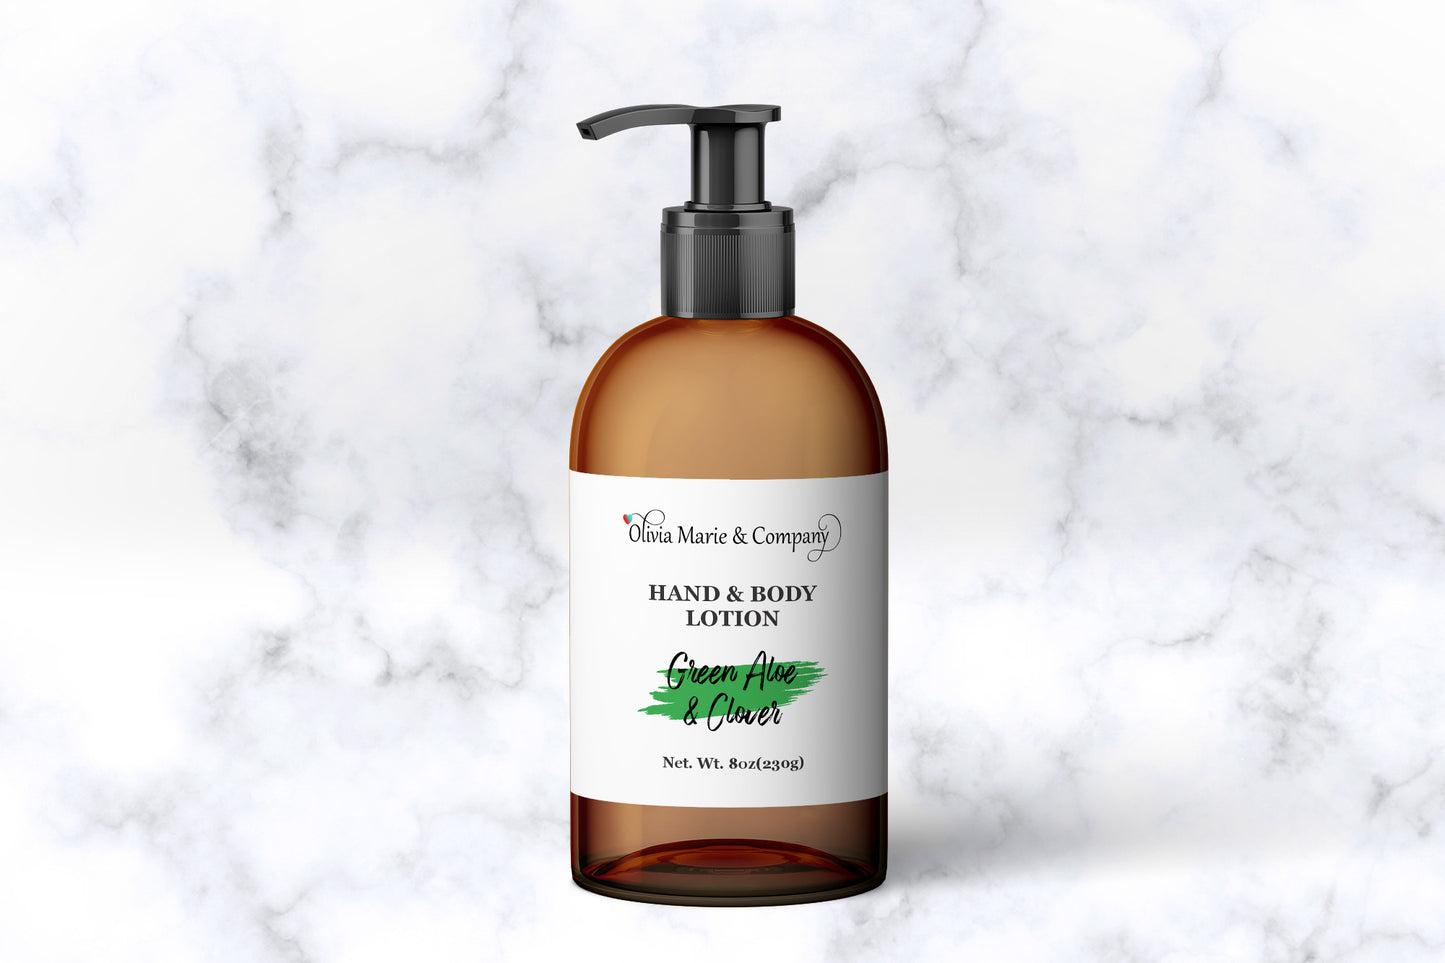 Green Aloe & Clover Hand and Body Lotion